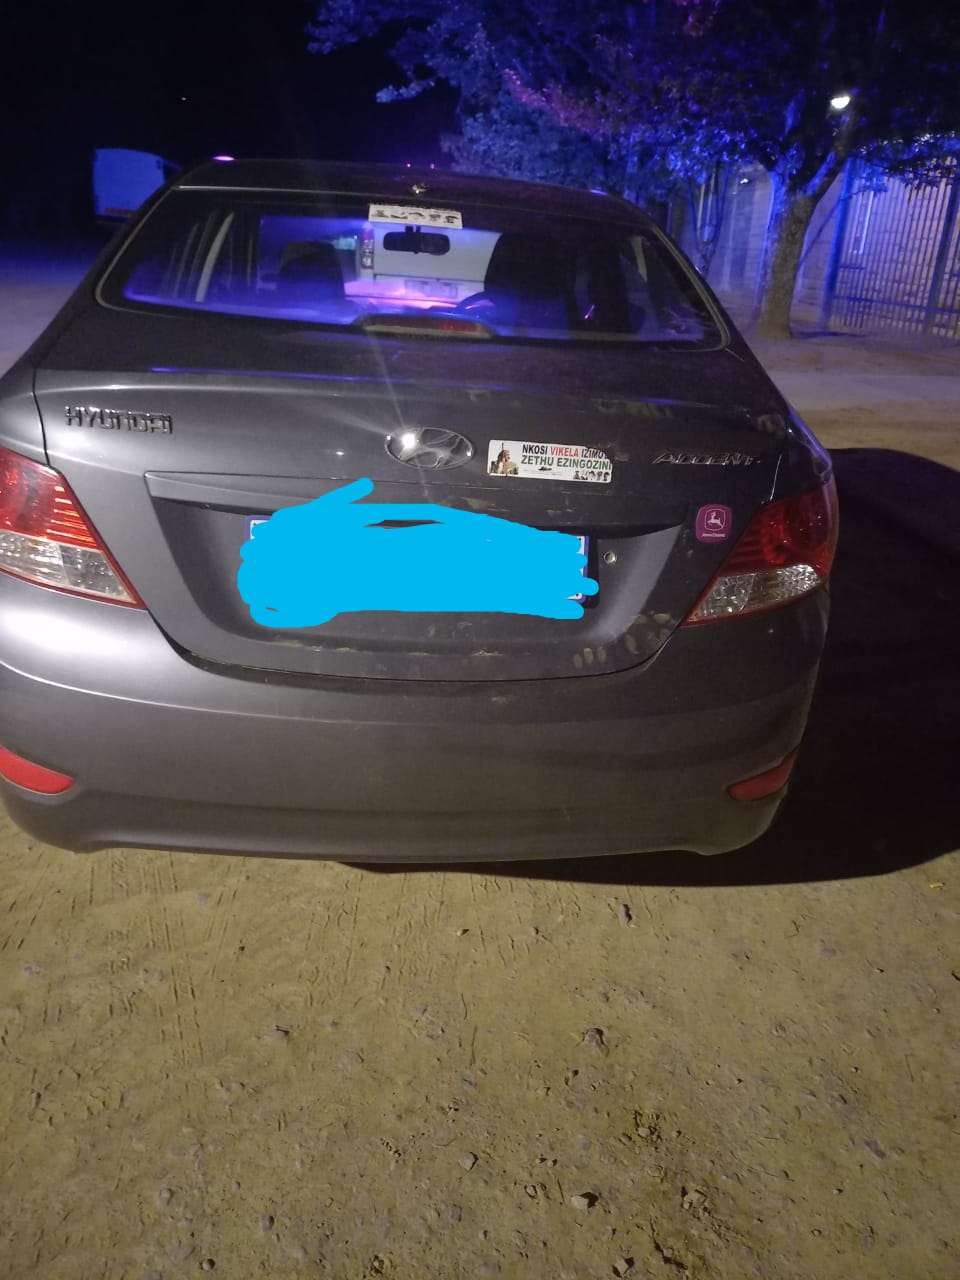 Trio arrested in possession of suspected stolen vehicle